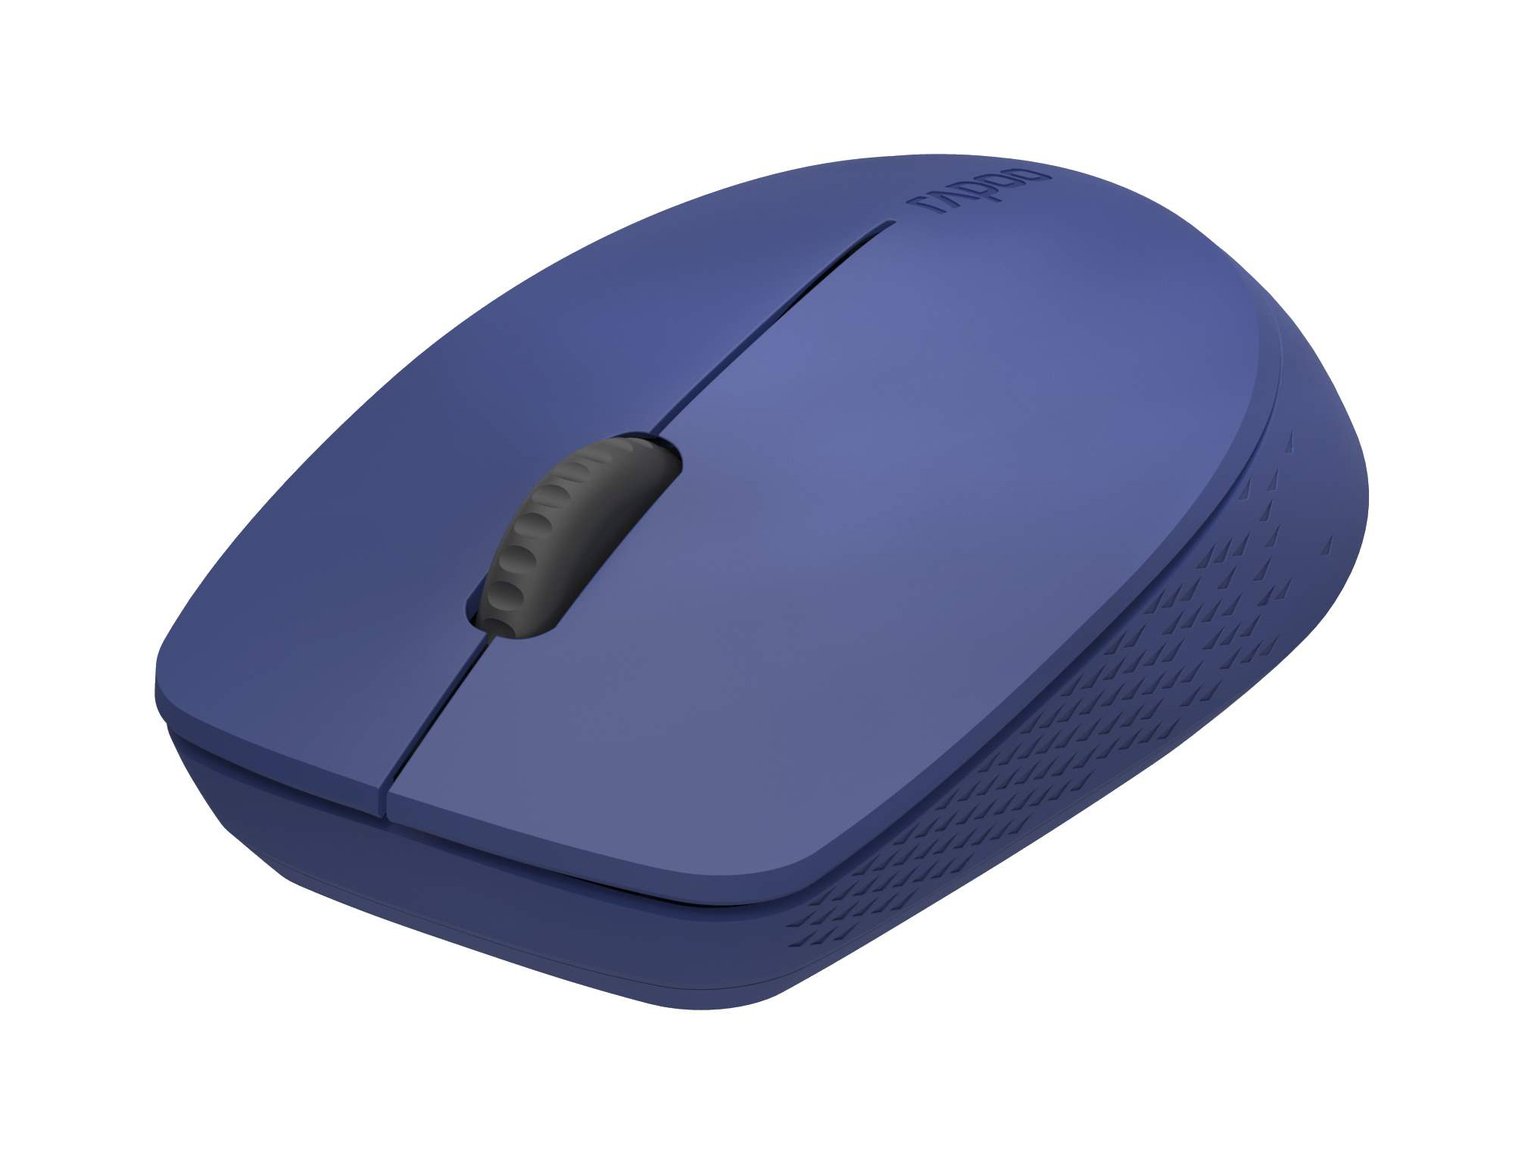 Rapoo M100 Multi Mode Wireless Mouse Review